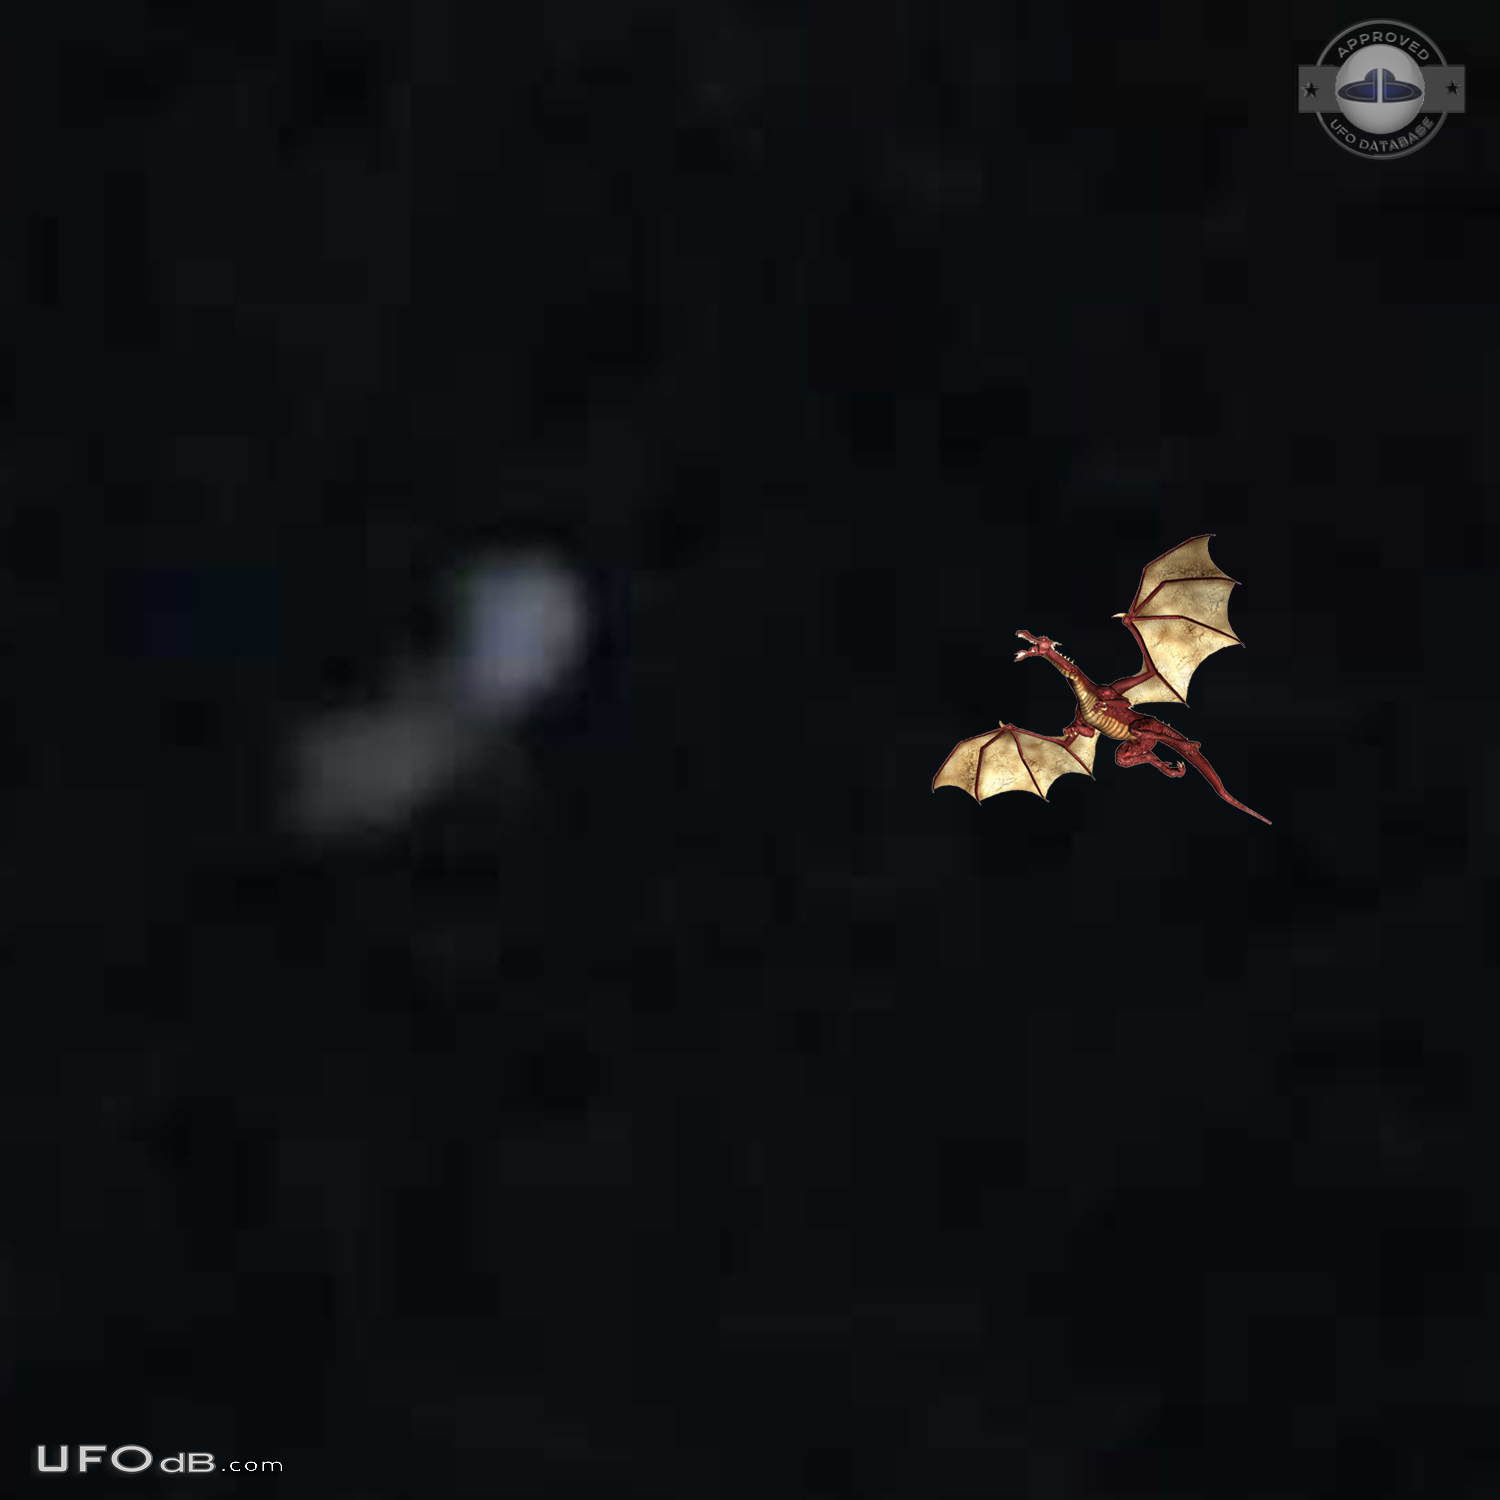 Multi week sightings of same UFO over multiple hours each night - Flor UFO Picture #775-4